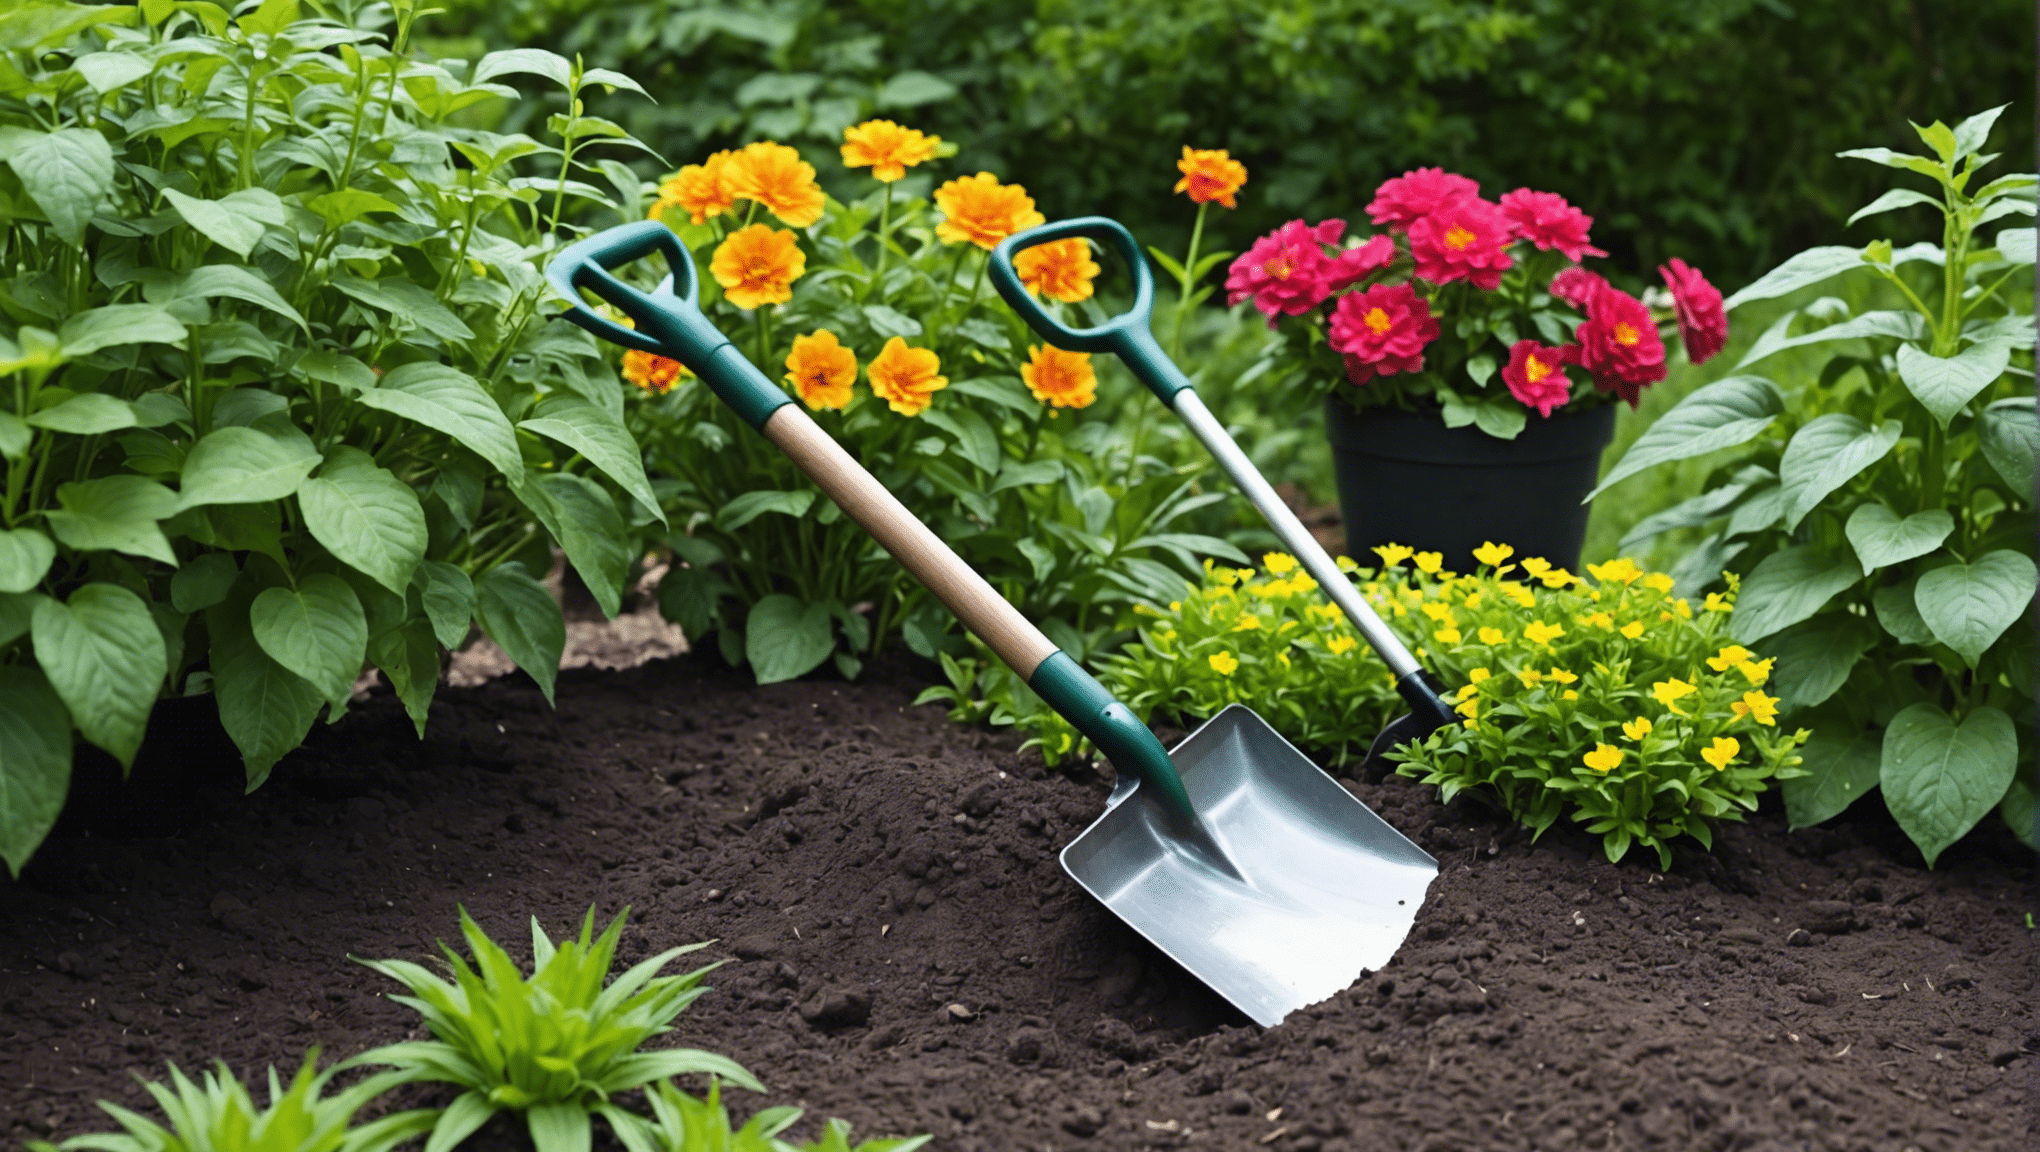 find the ideal small garden shovel for all your gardening needs with our selection of high-quality, durable tools.